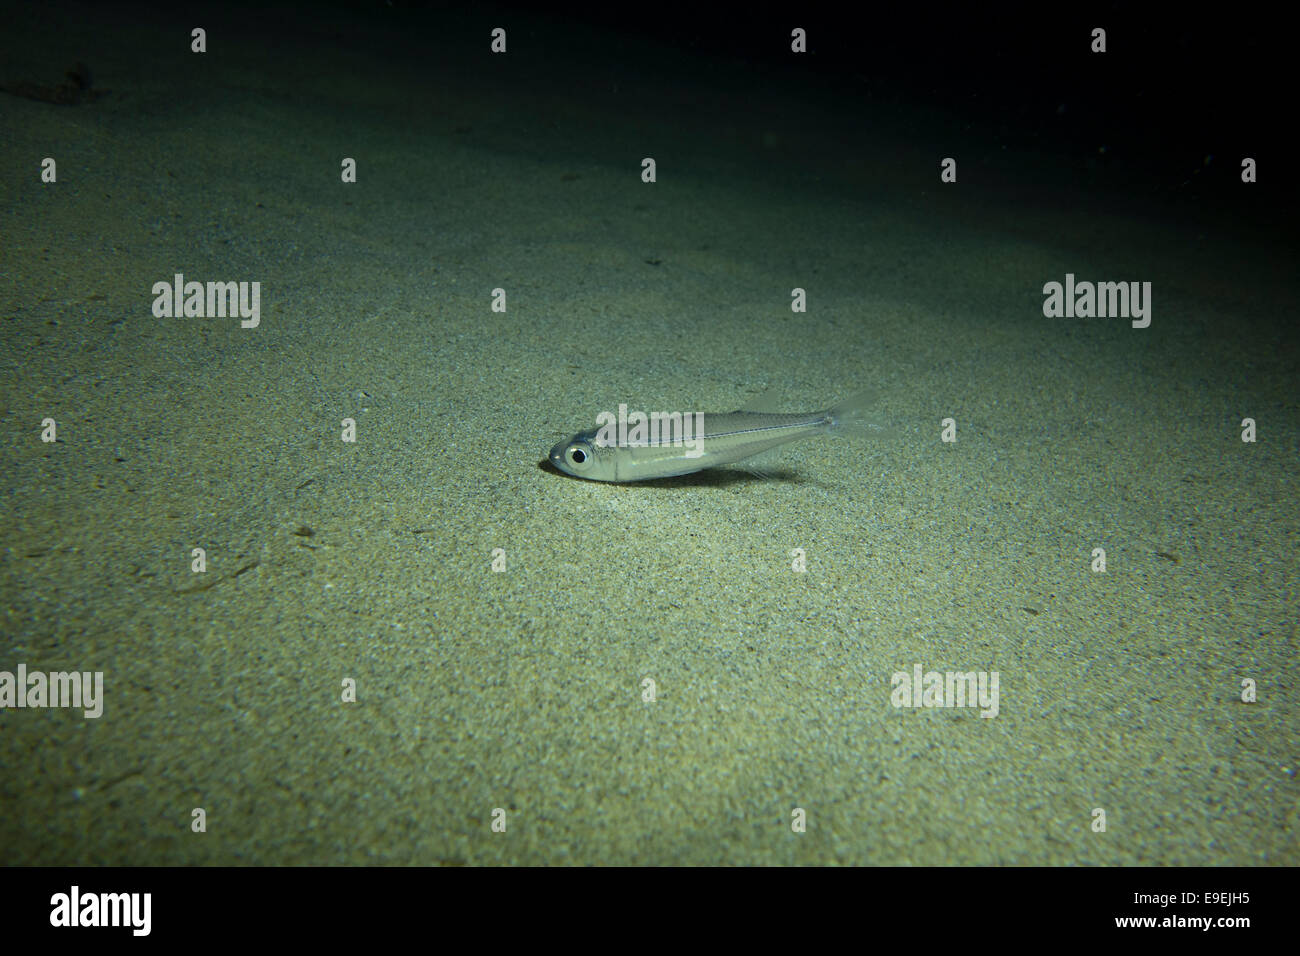 Big-scale sand smelt, Atherina boyeri, looking for small benthic crustacean and molluscs. Picture from Malta, Mediterranean Sea Stock Photo